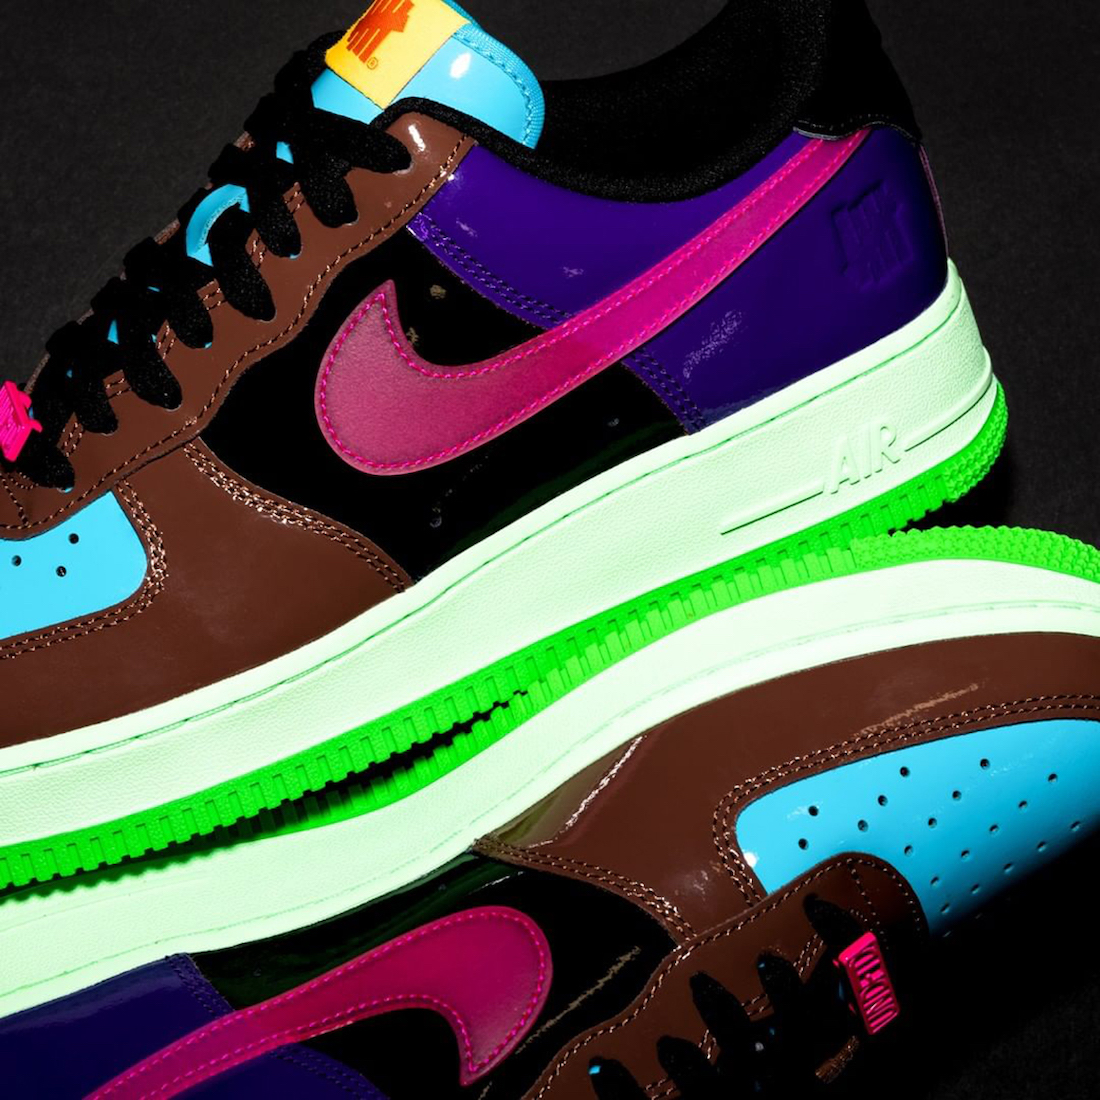 Undefeated Nike Air Force 1 Low Pink Prime Release Date